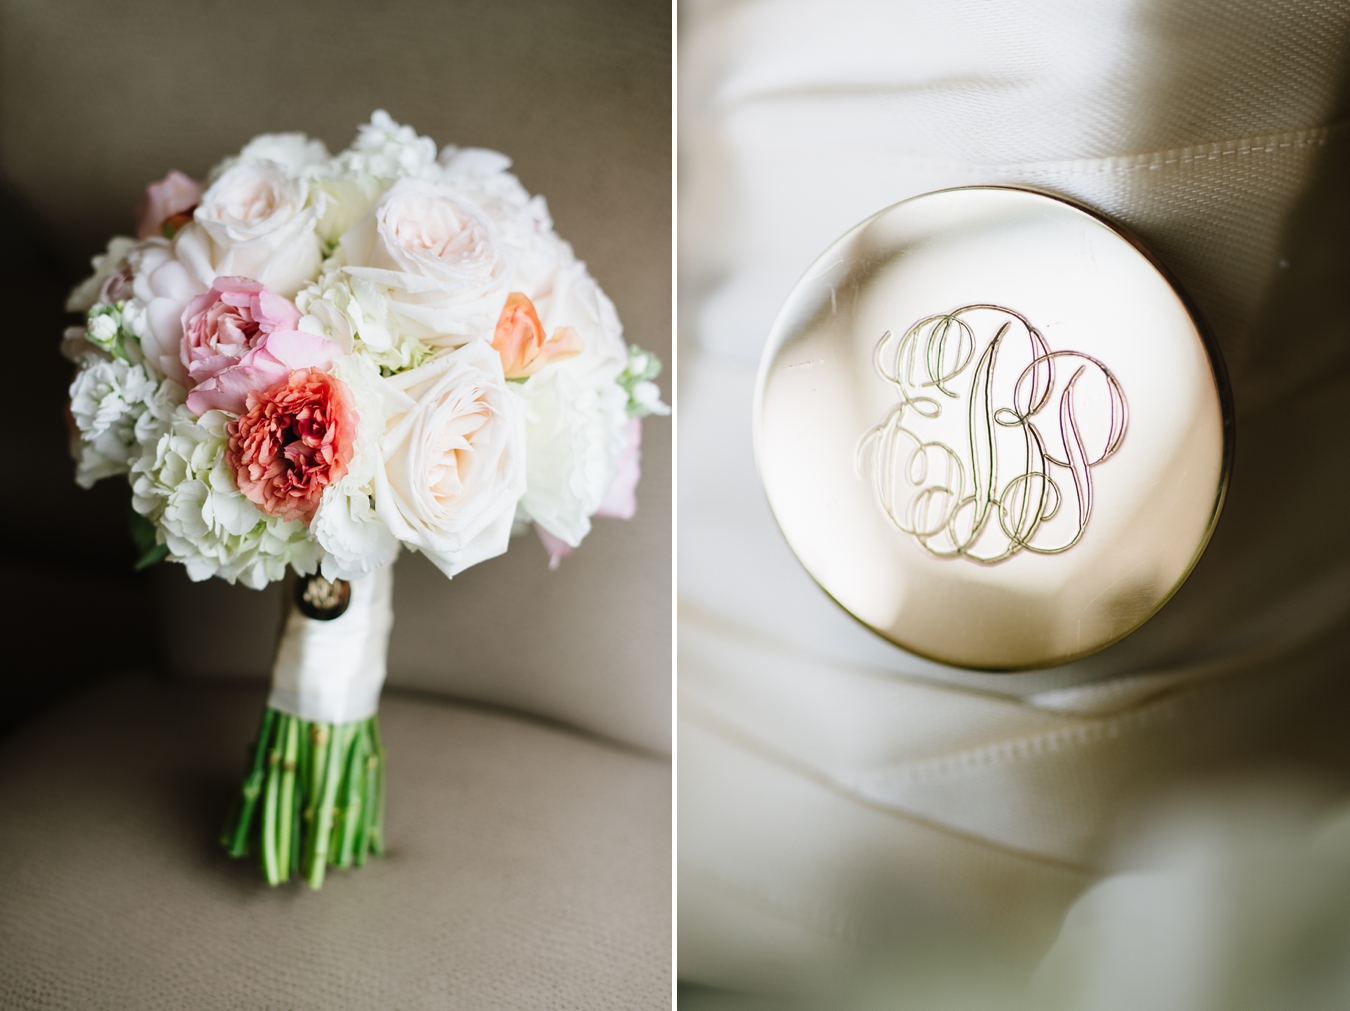 Monogram Engraved Wedding Bouquet with Peonies and Roses